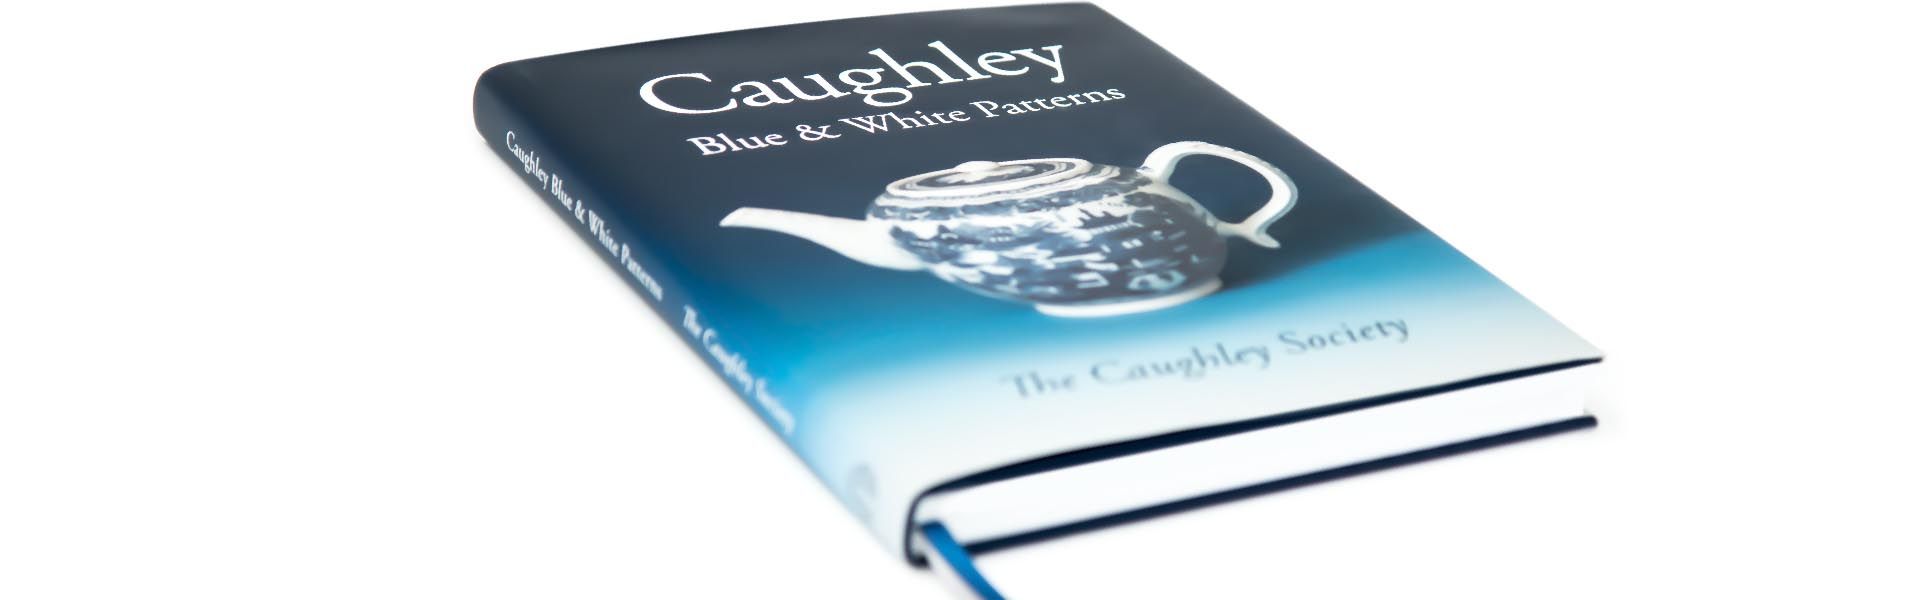 a copy of the caughley blue and white pattern book published  by the caughley society